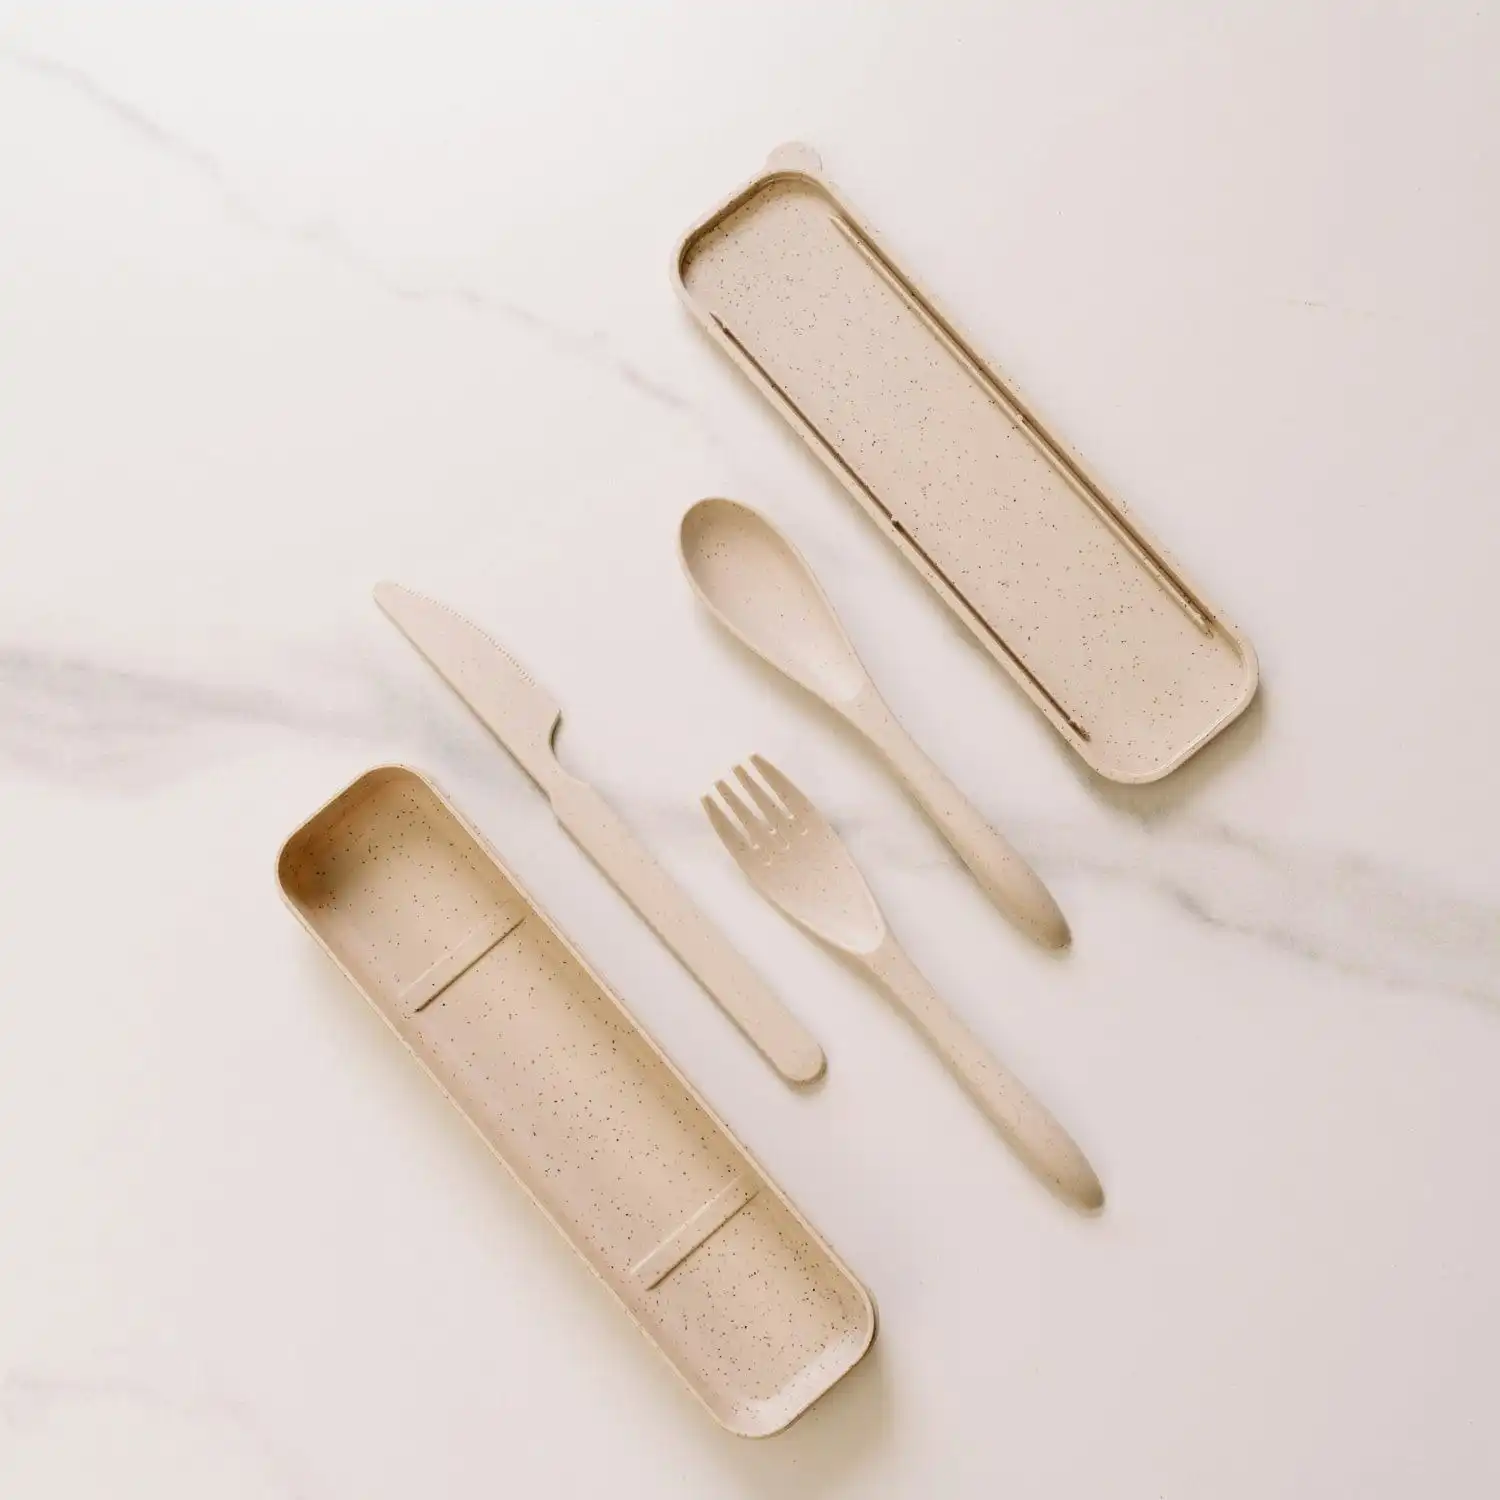 Clevinger Reusable Wheat Straw Fibre Cutlery Set with Case - Beige